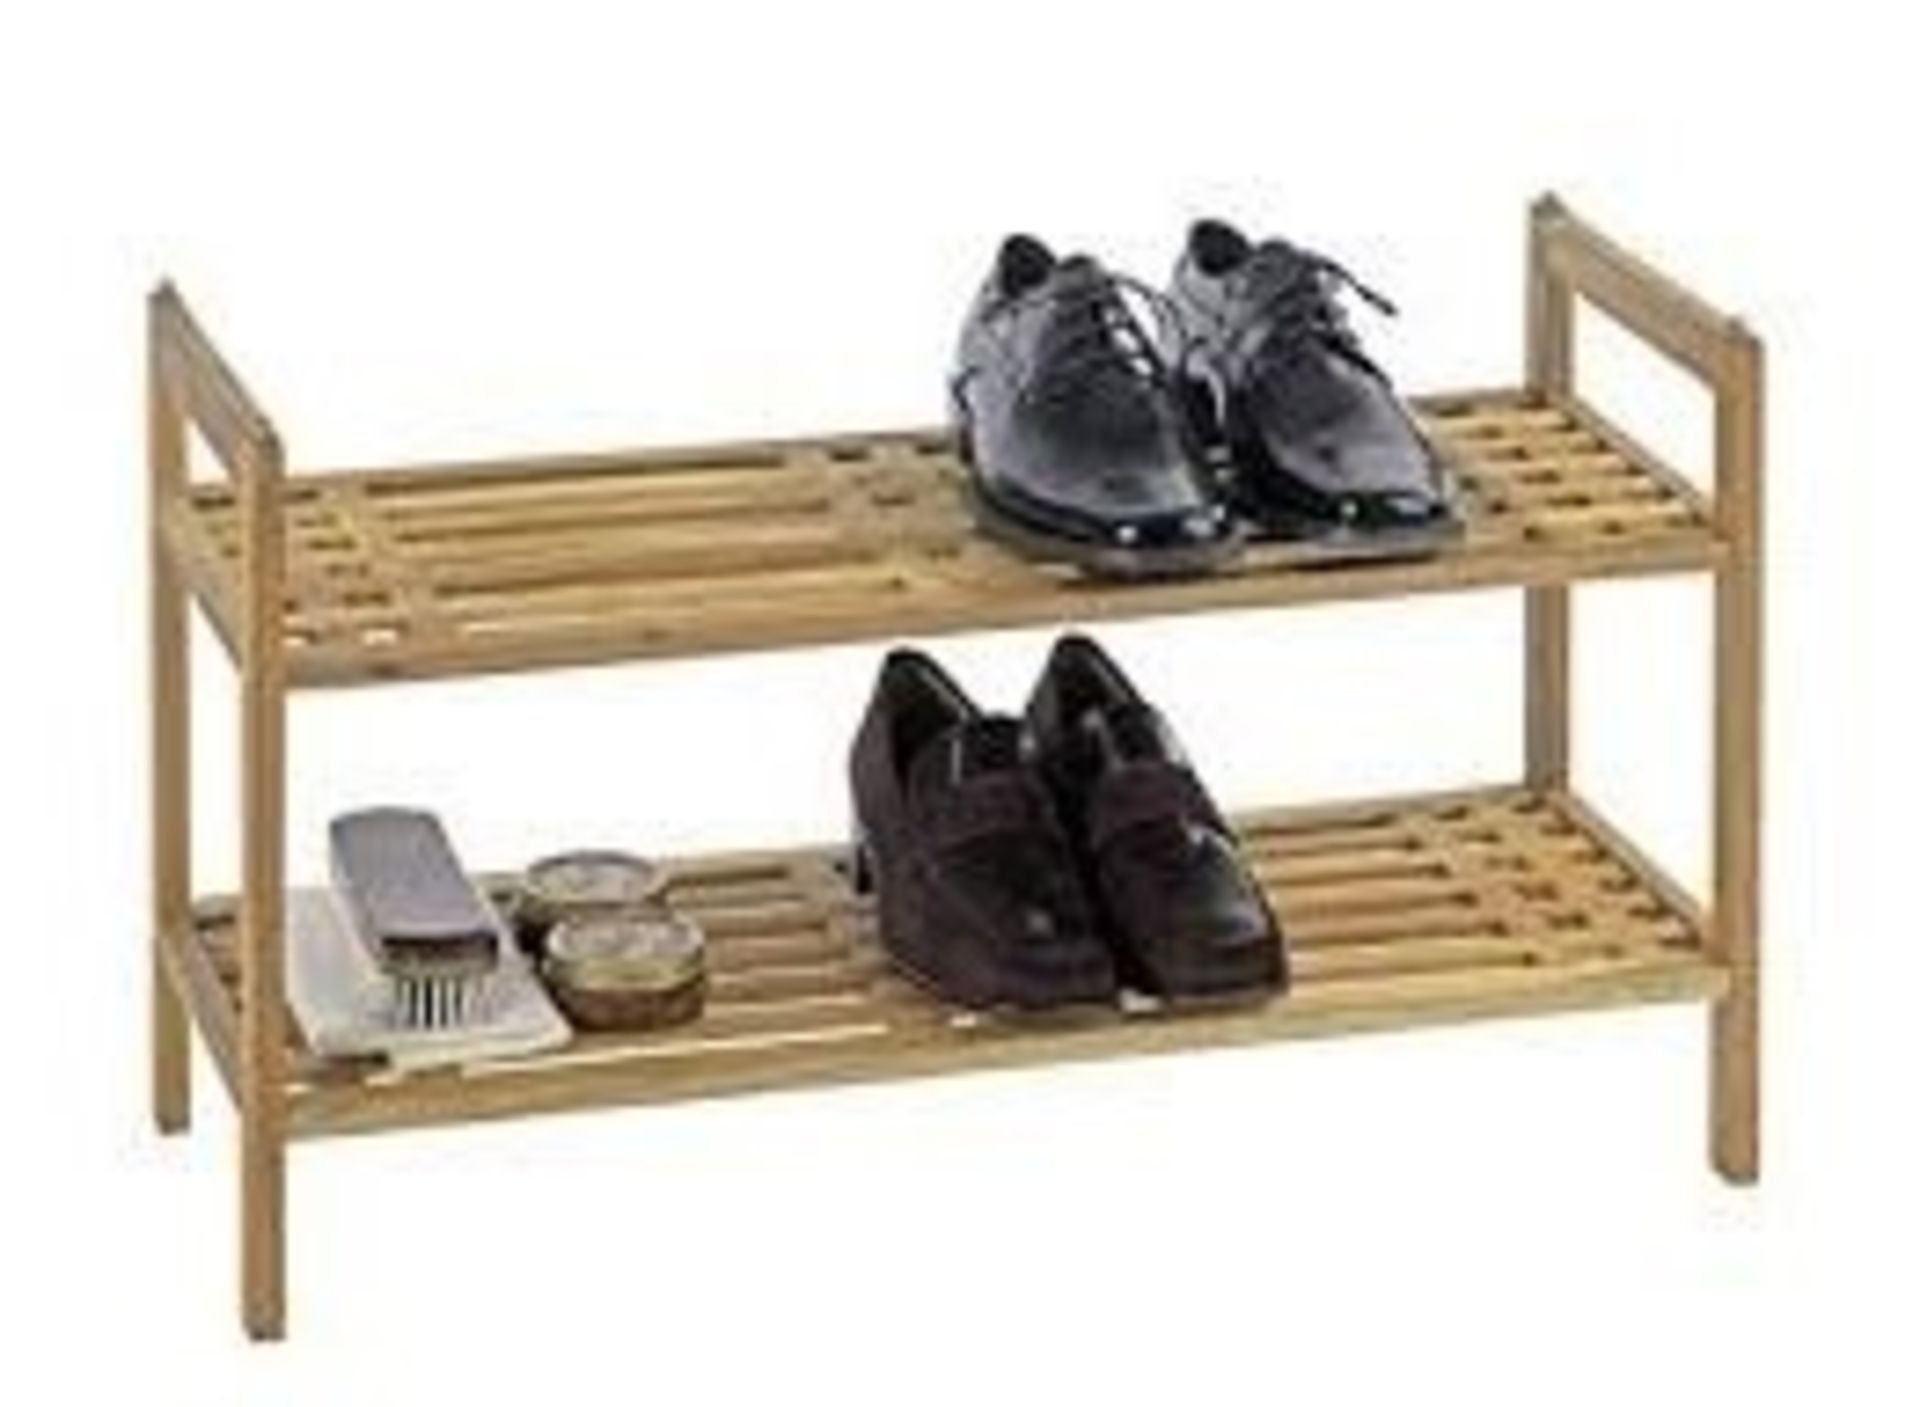 Boxed Wenko Norway Wooden 2 Tier Shoe Racks RRP £30 Each (3412662)(3412649) (Public Viewing and